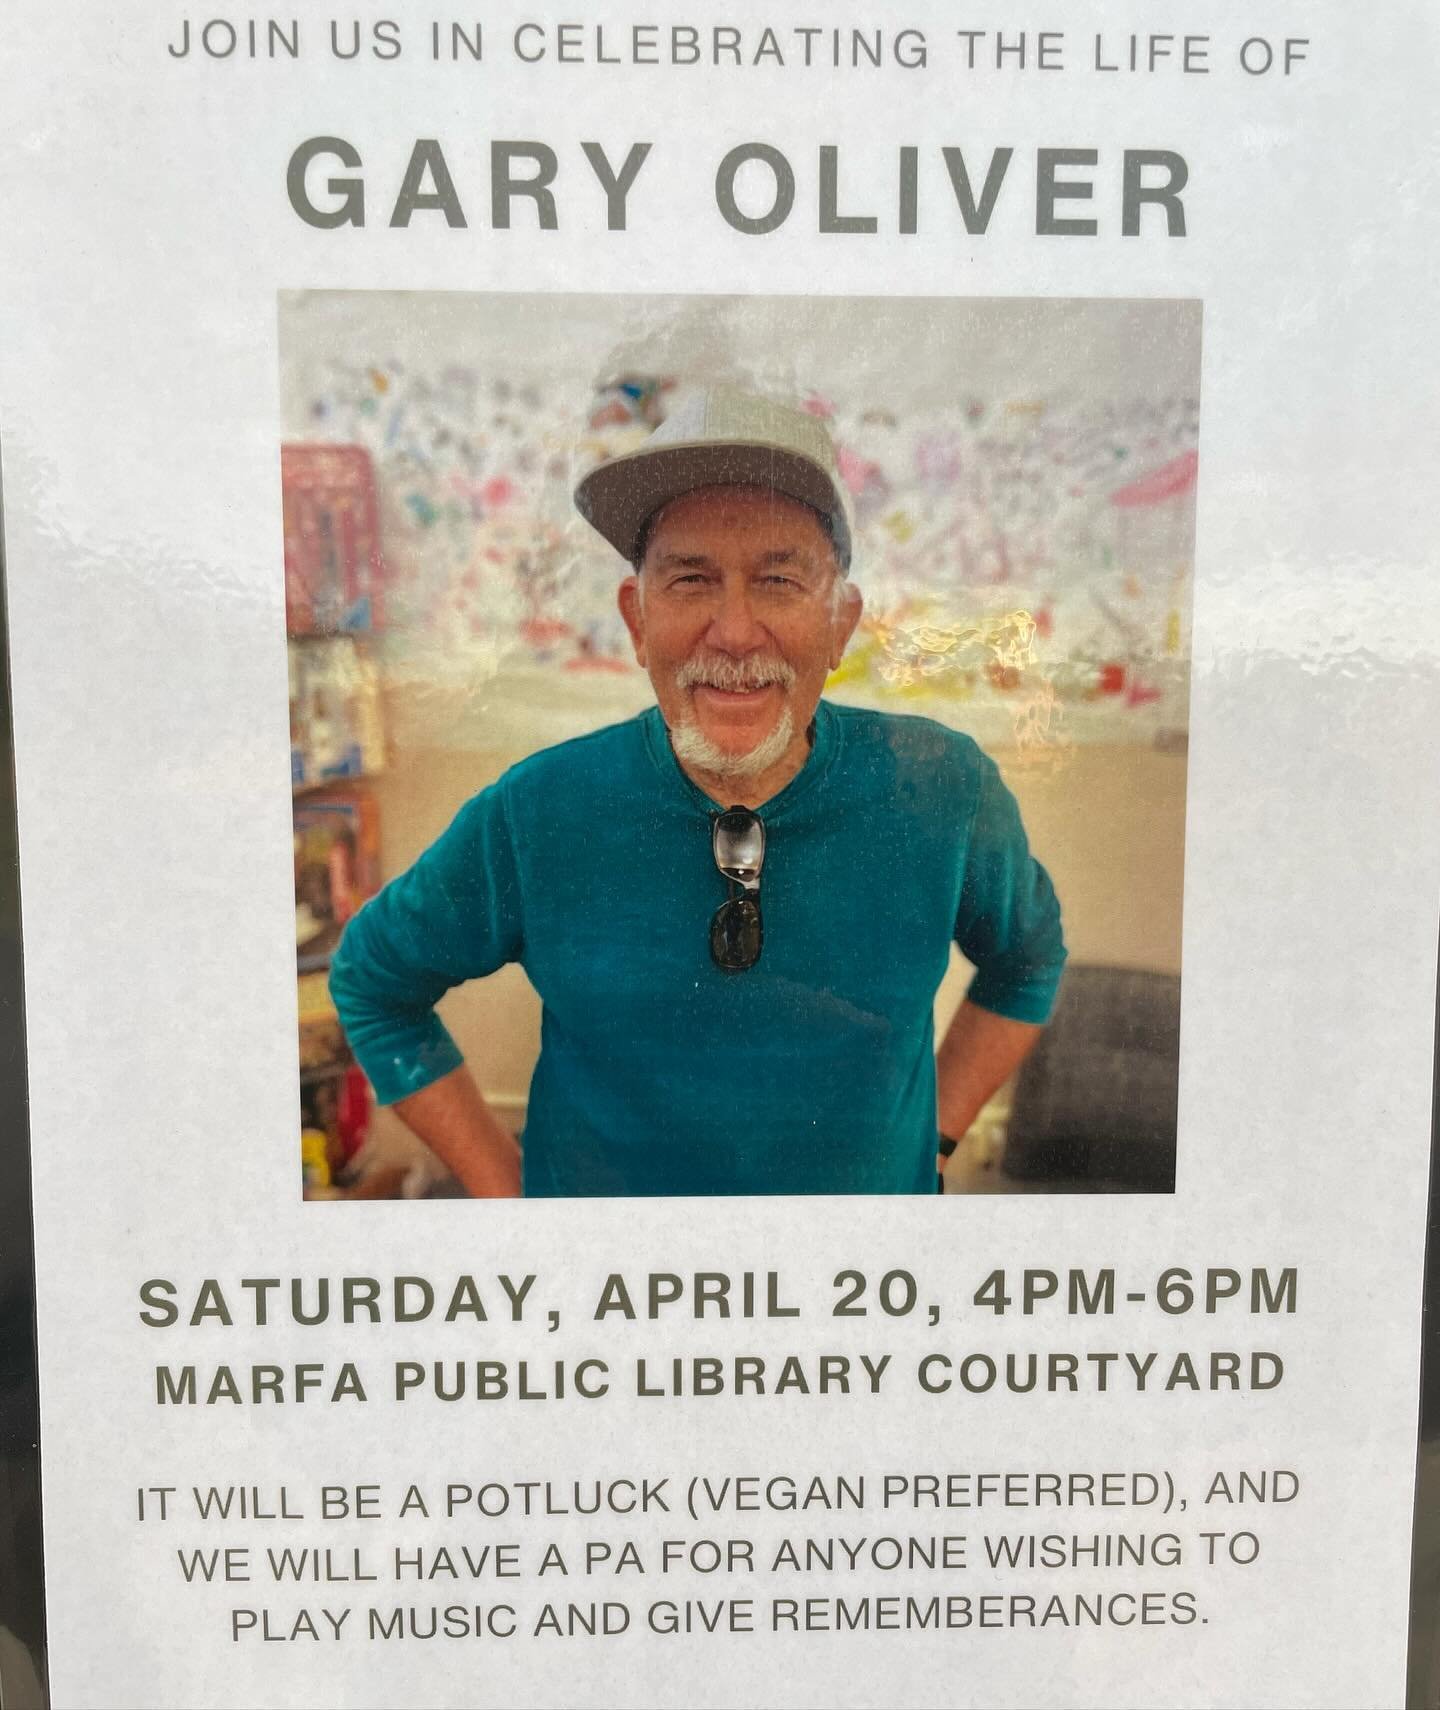 A beautiful &amp; joyous farewell to a most cherished member of the Marfan community was held Saturday afternoon at the Marfa Public Library where Gary Oliver spearheaded the community garden &amp; was board president / he was an avid cinephile showi